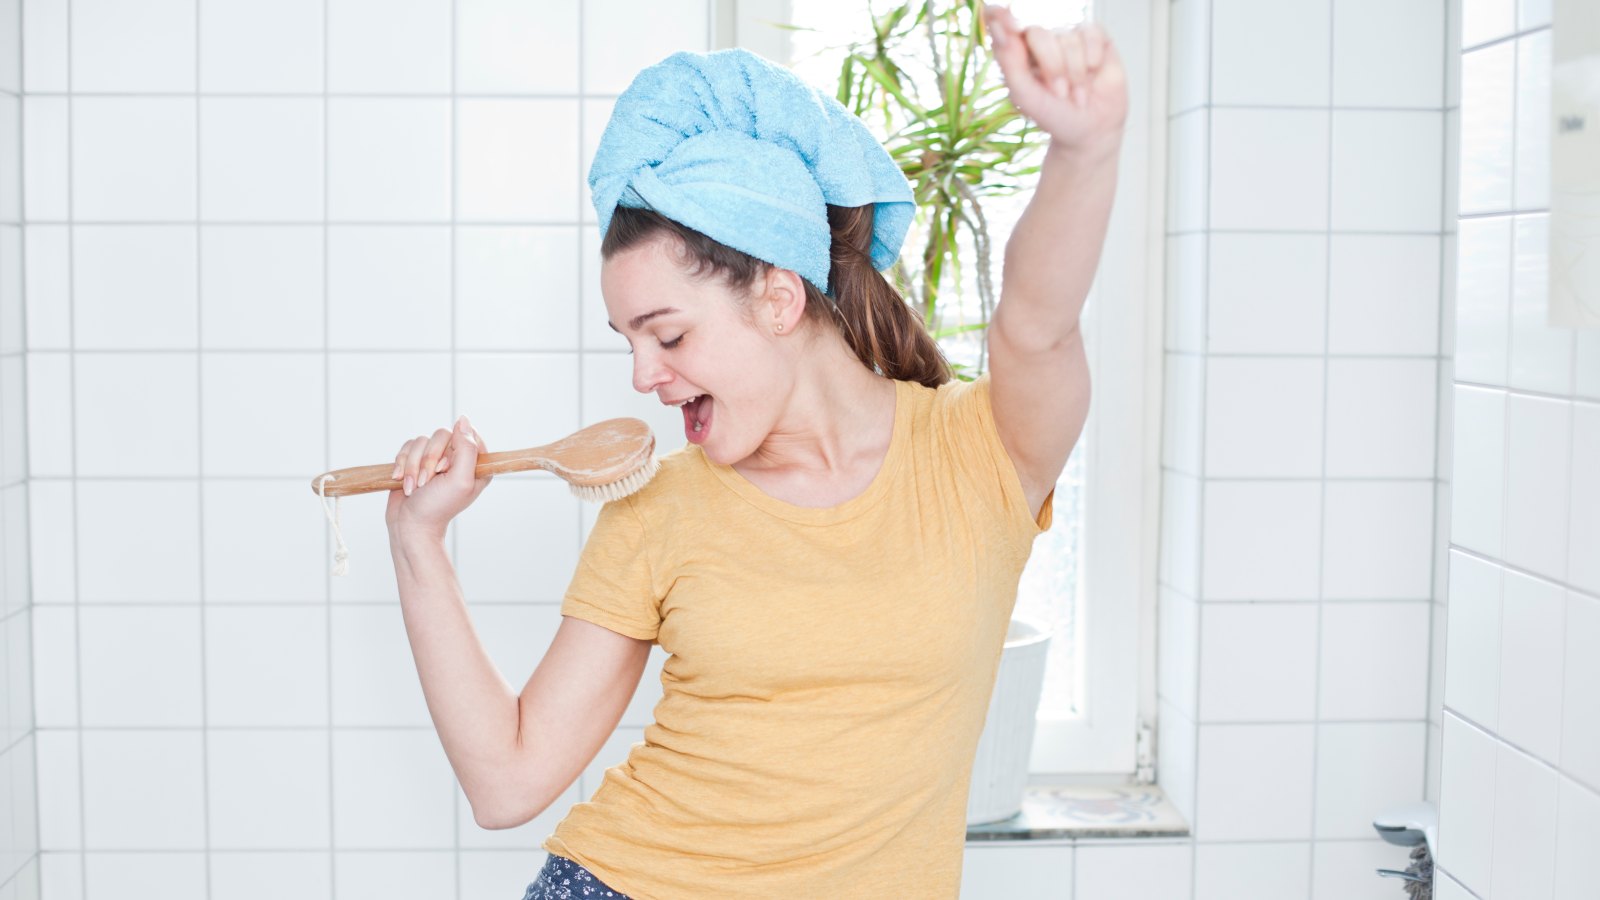 Portrait of young woman singing in the bathroom using massage brush as microphone